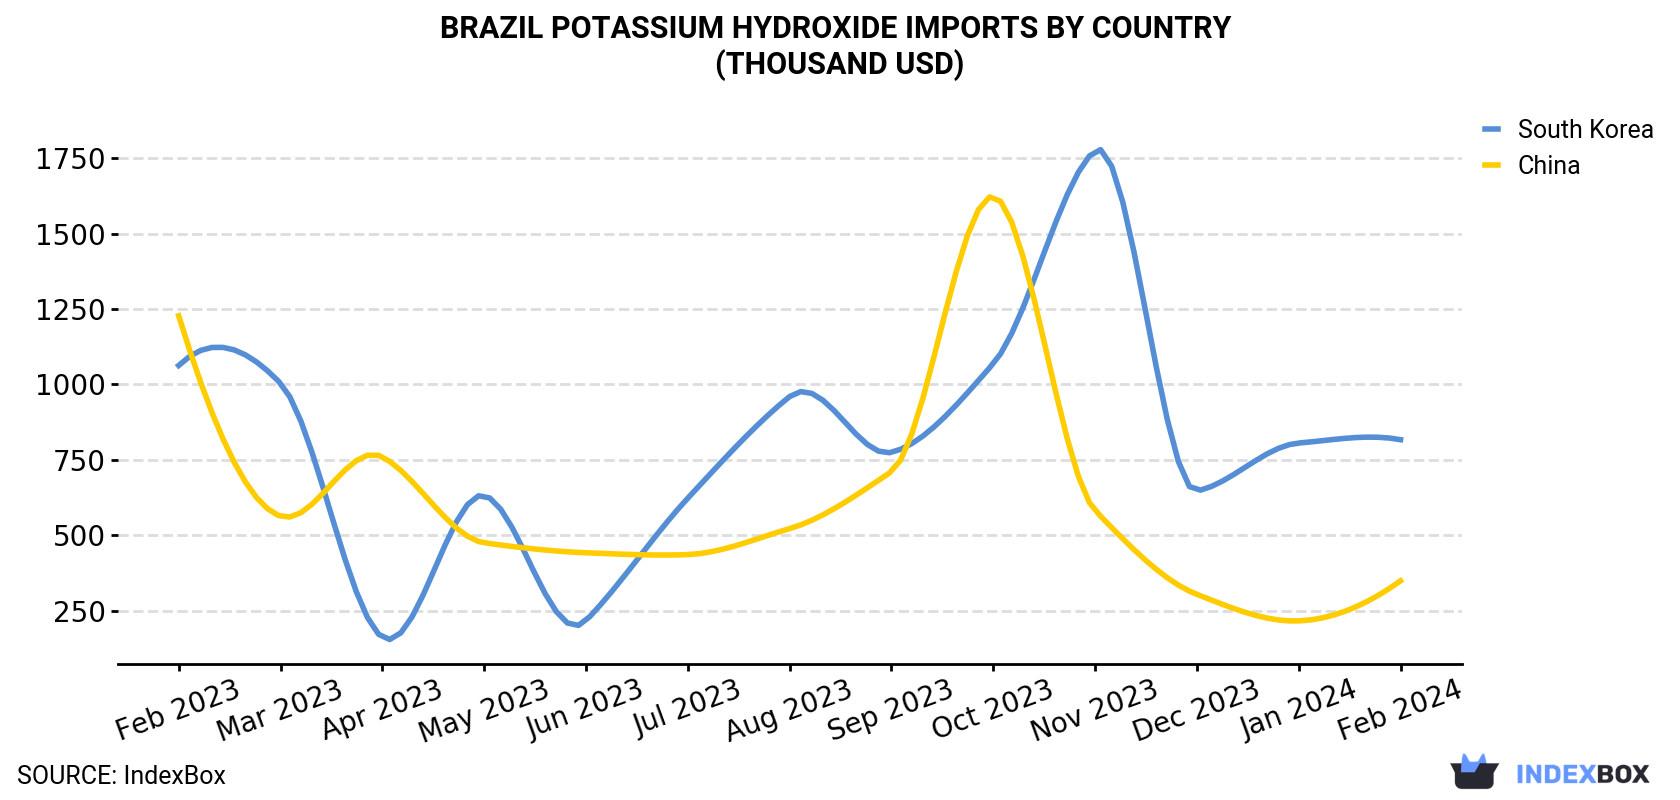 Brazil Potassium Hydroxide Imports By Country (Thousand USD)